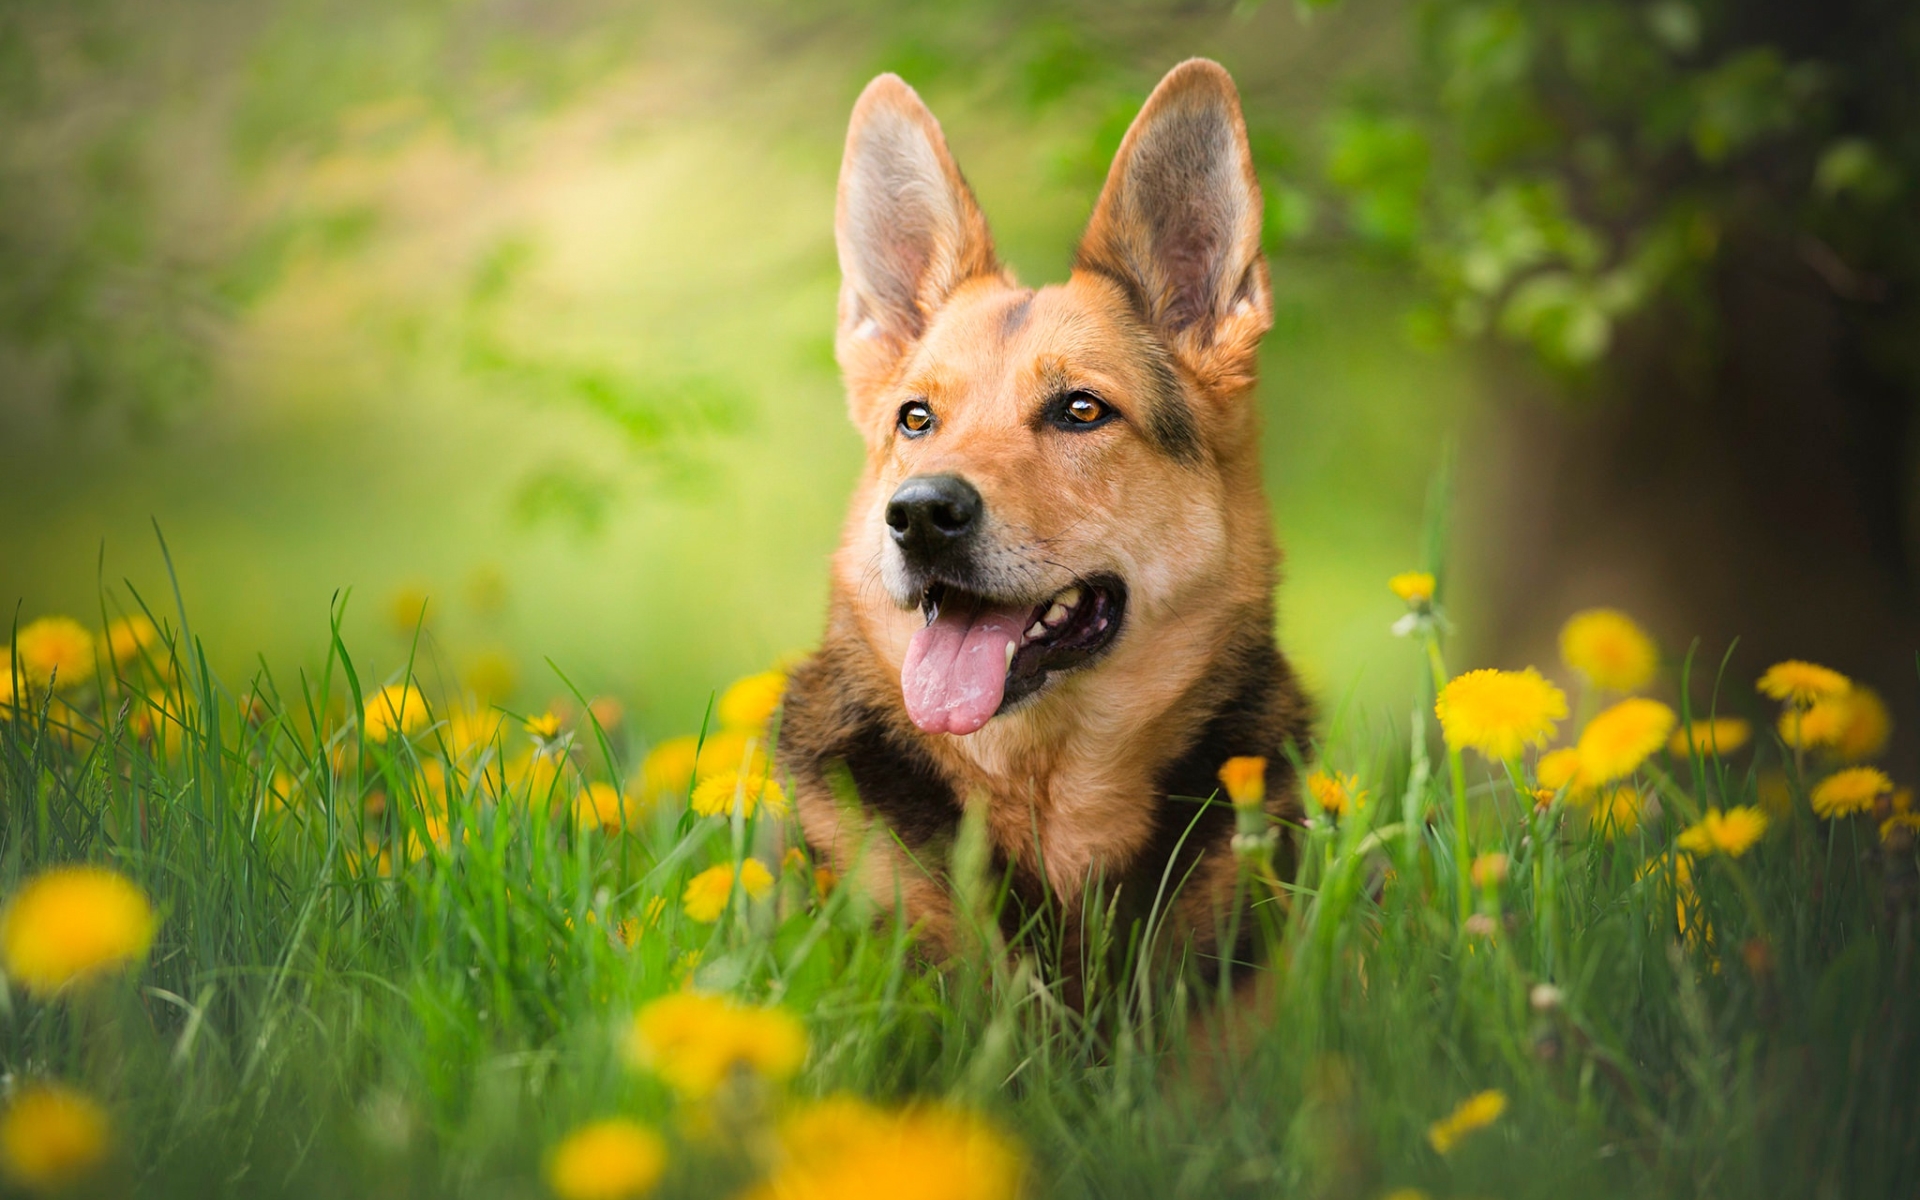 Download wallpaper German Shepherd, forest, bokeh, cute animals, summer, dogs, yellow flowers, German Shepherd Dog, pets for desktop with resolution 1920x1200. High Quality HD picture wallpaper